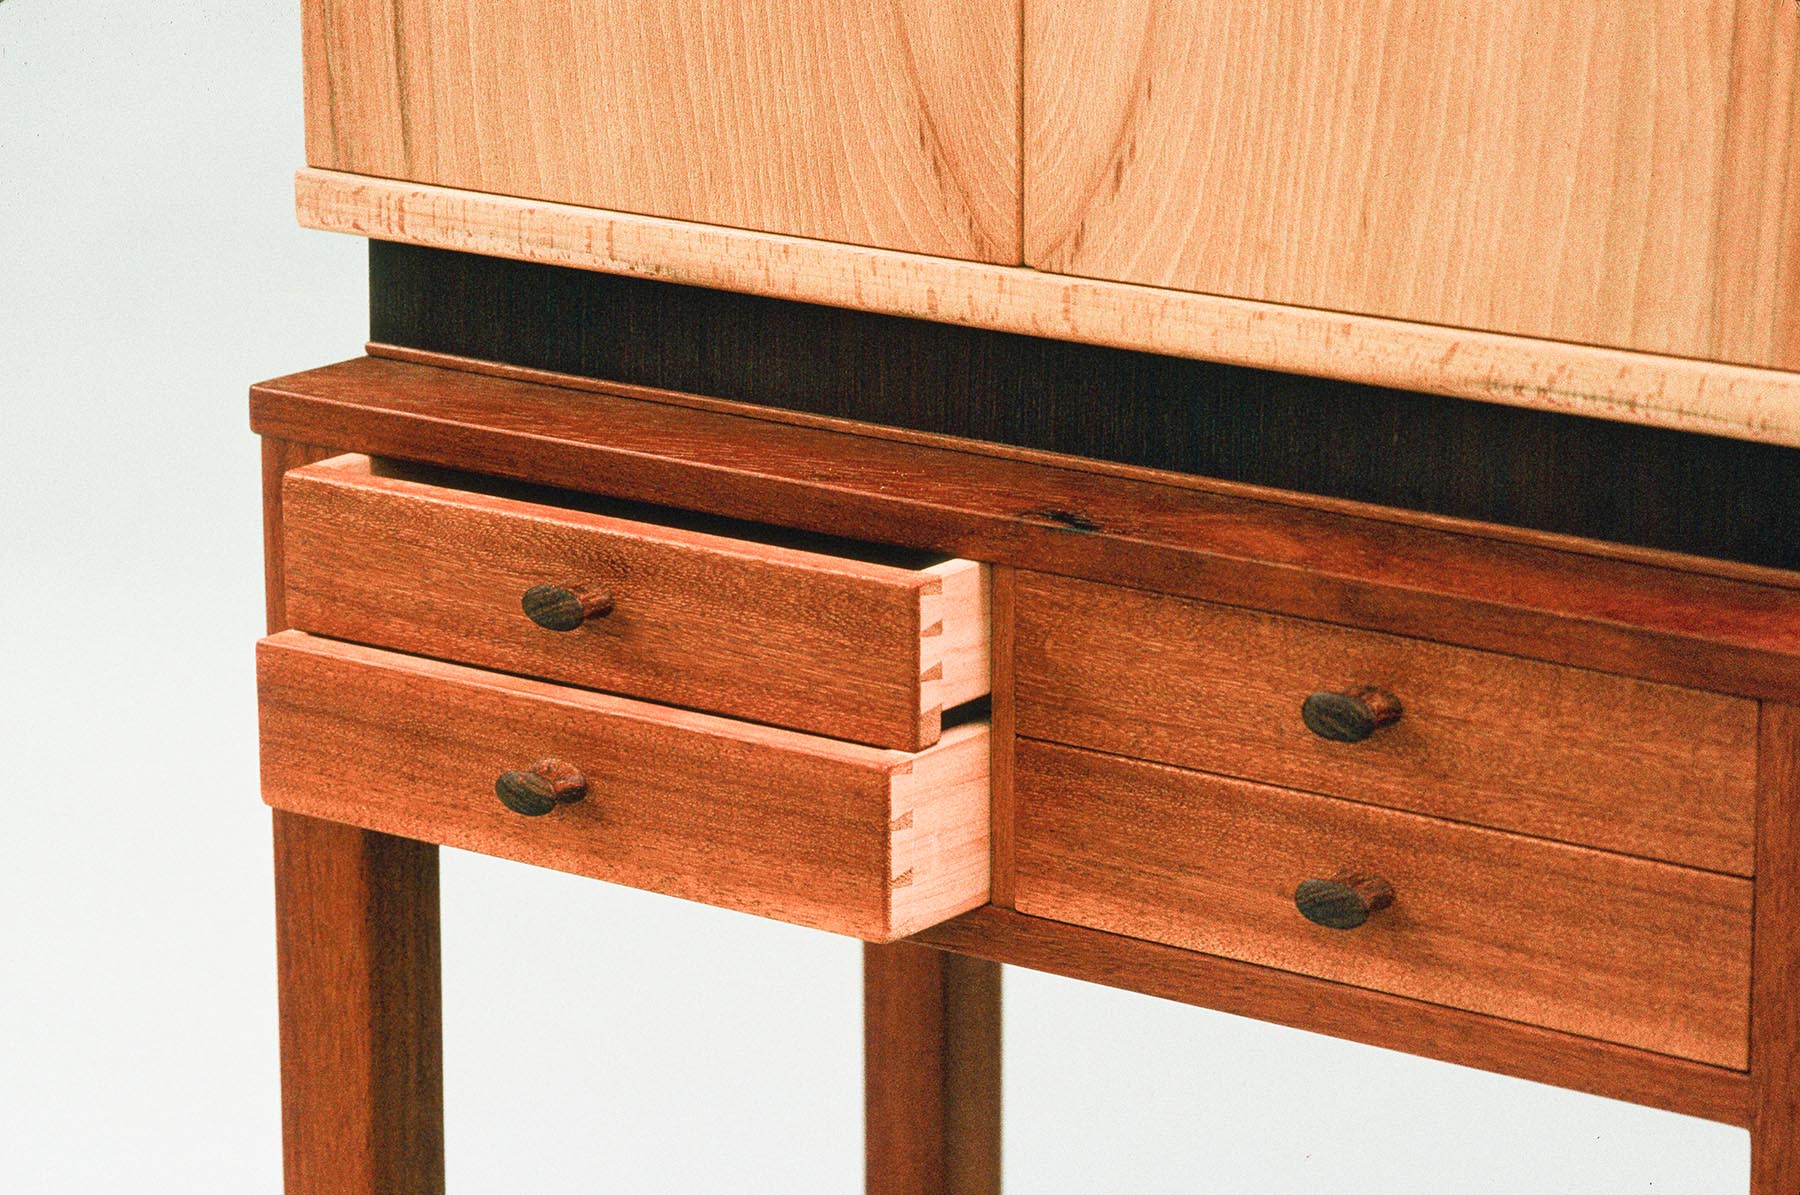 Beech Cabinet with Drawer Stand